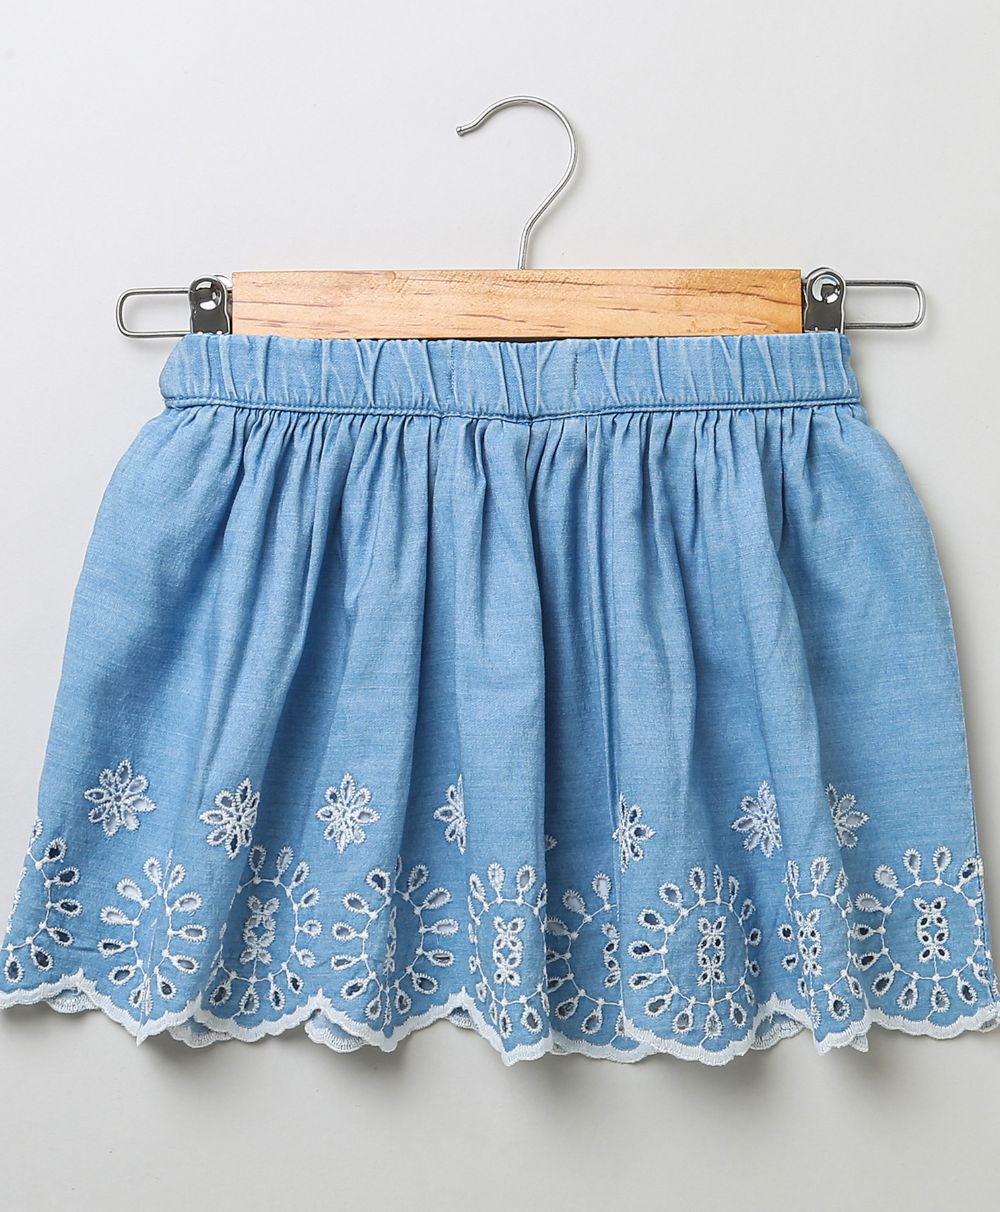 Sweetlime By As Schiffly Embroidery Cotton Denim Skirt- Blue - SLG-SKIRT-00986_12-18M